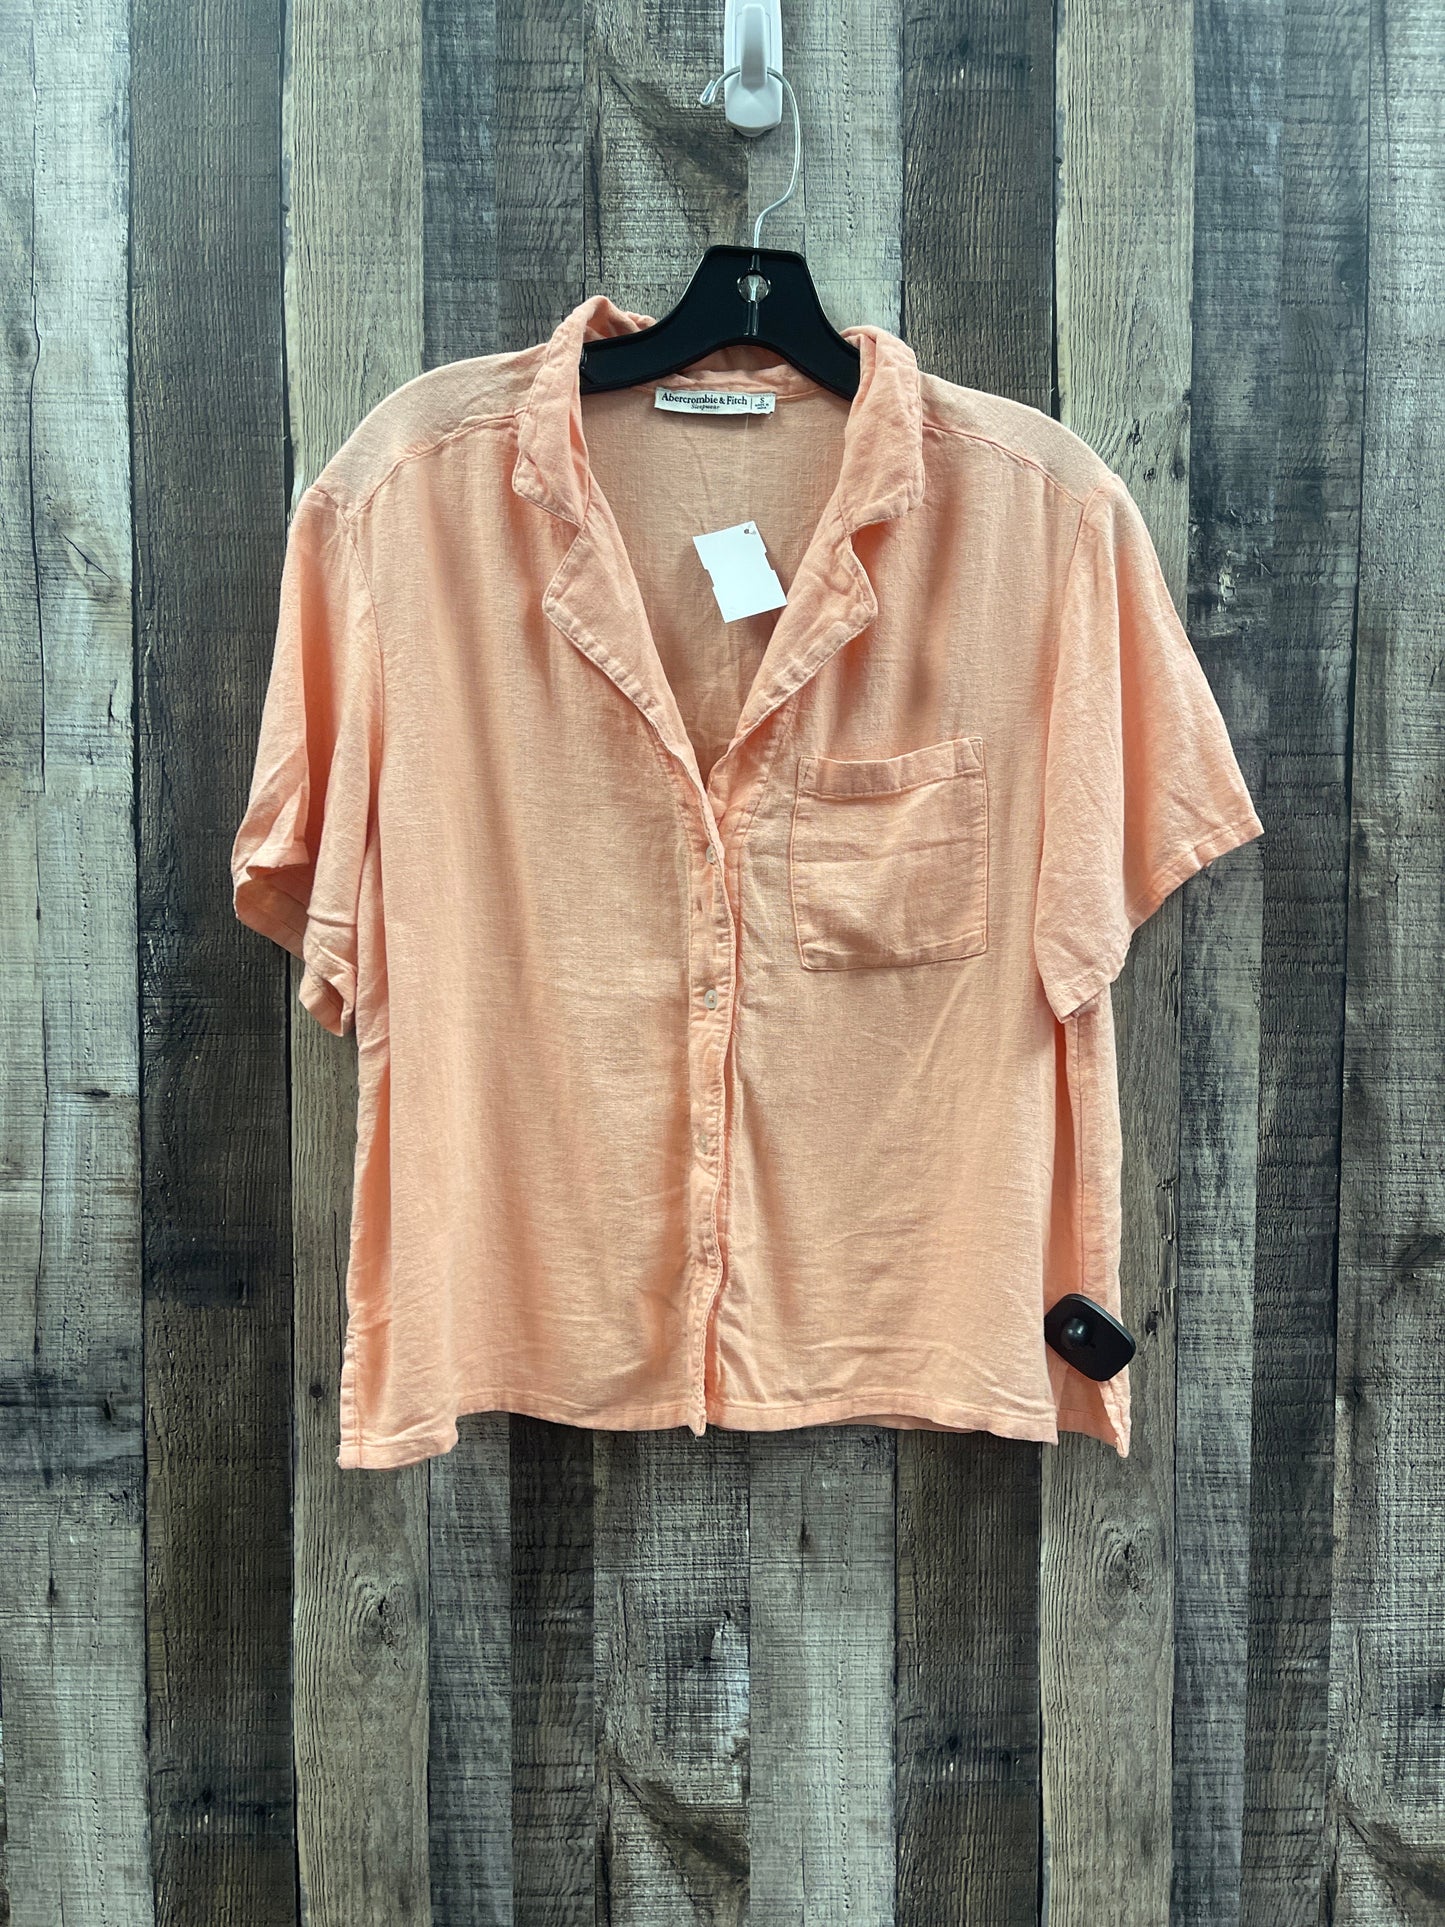 Orange Top Short Sleeve Abercrombie And Fitch, Size S